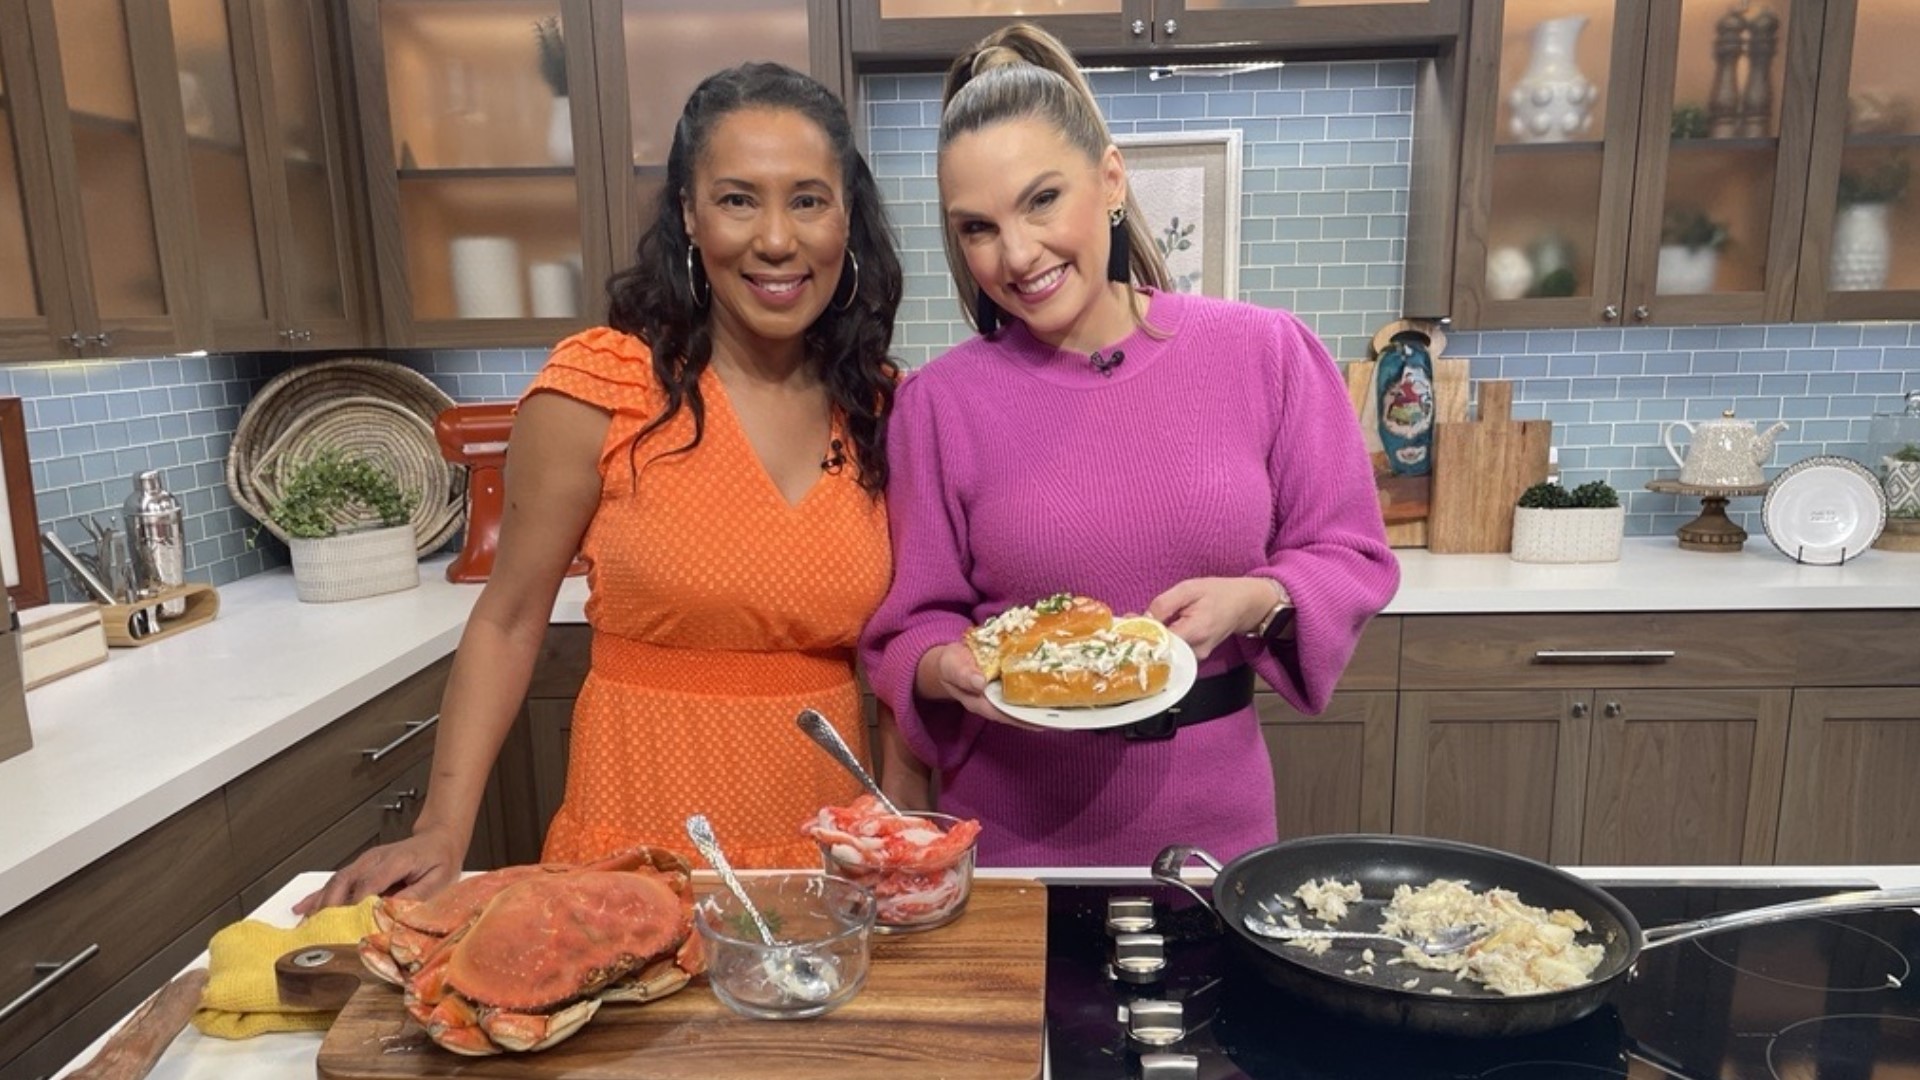 Stephanie Harris-Uyidi, author of "Going Coastal," joined the show to share a recipe and give tips on how to pick good, fresh crab. #newdaynw